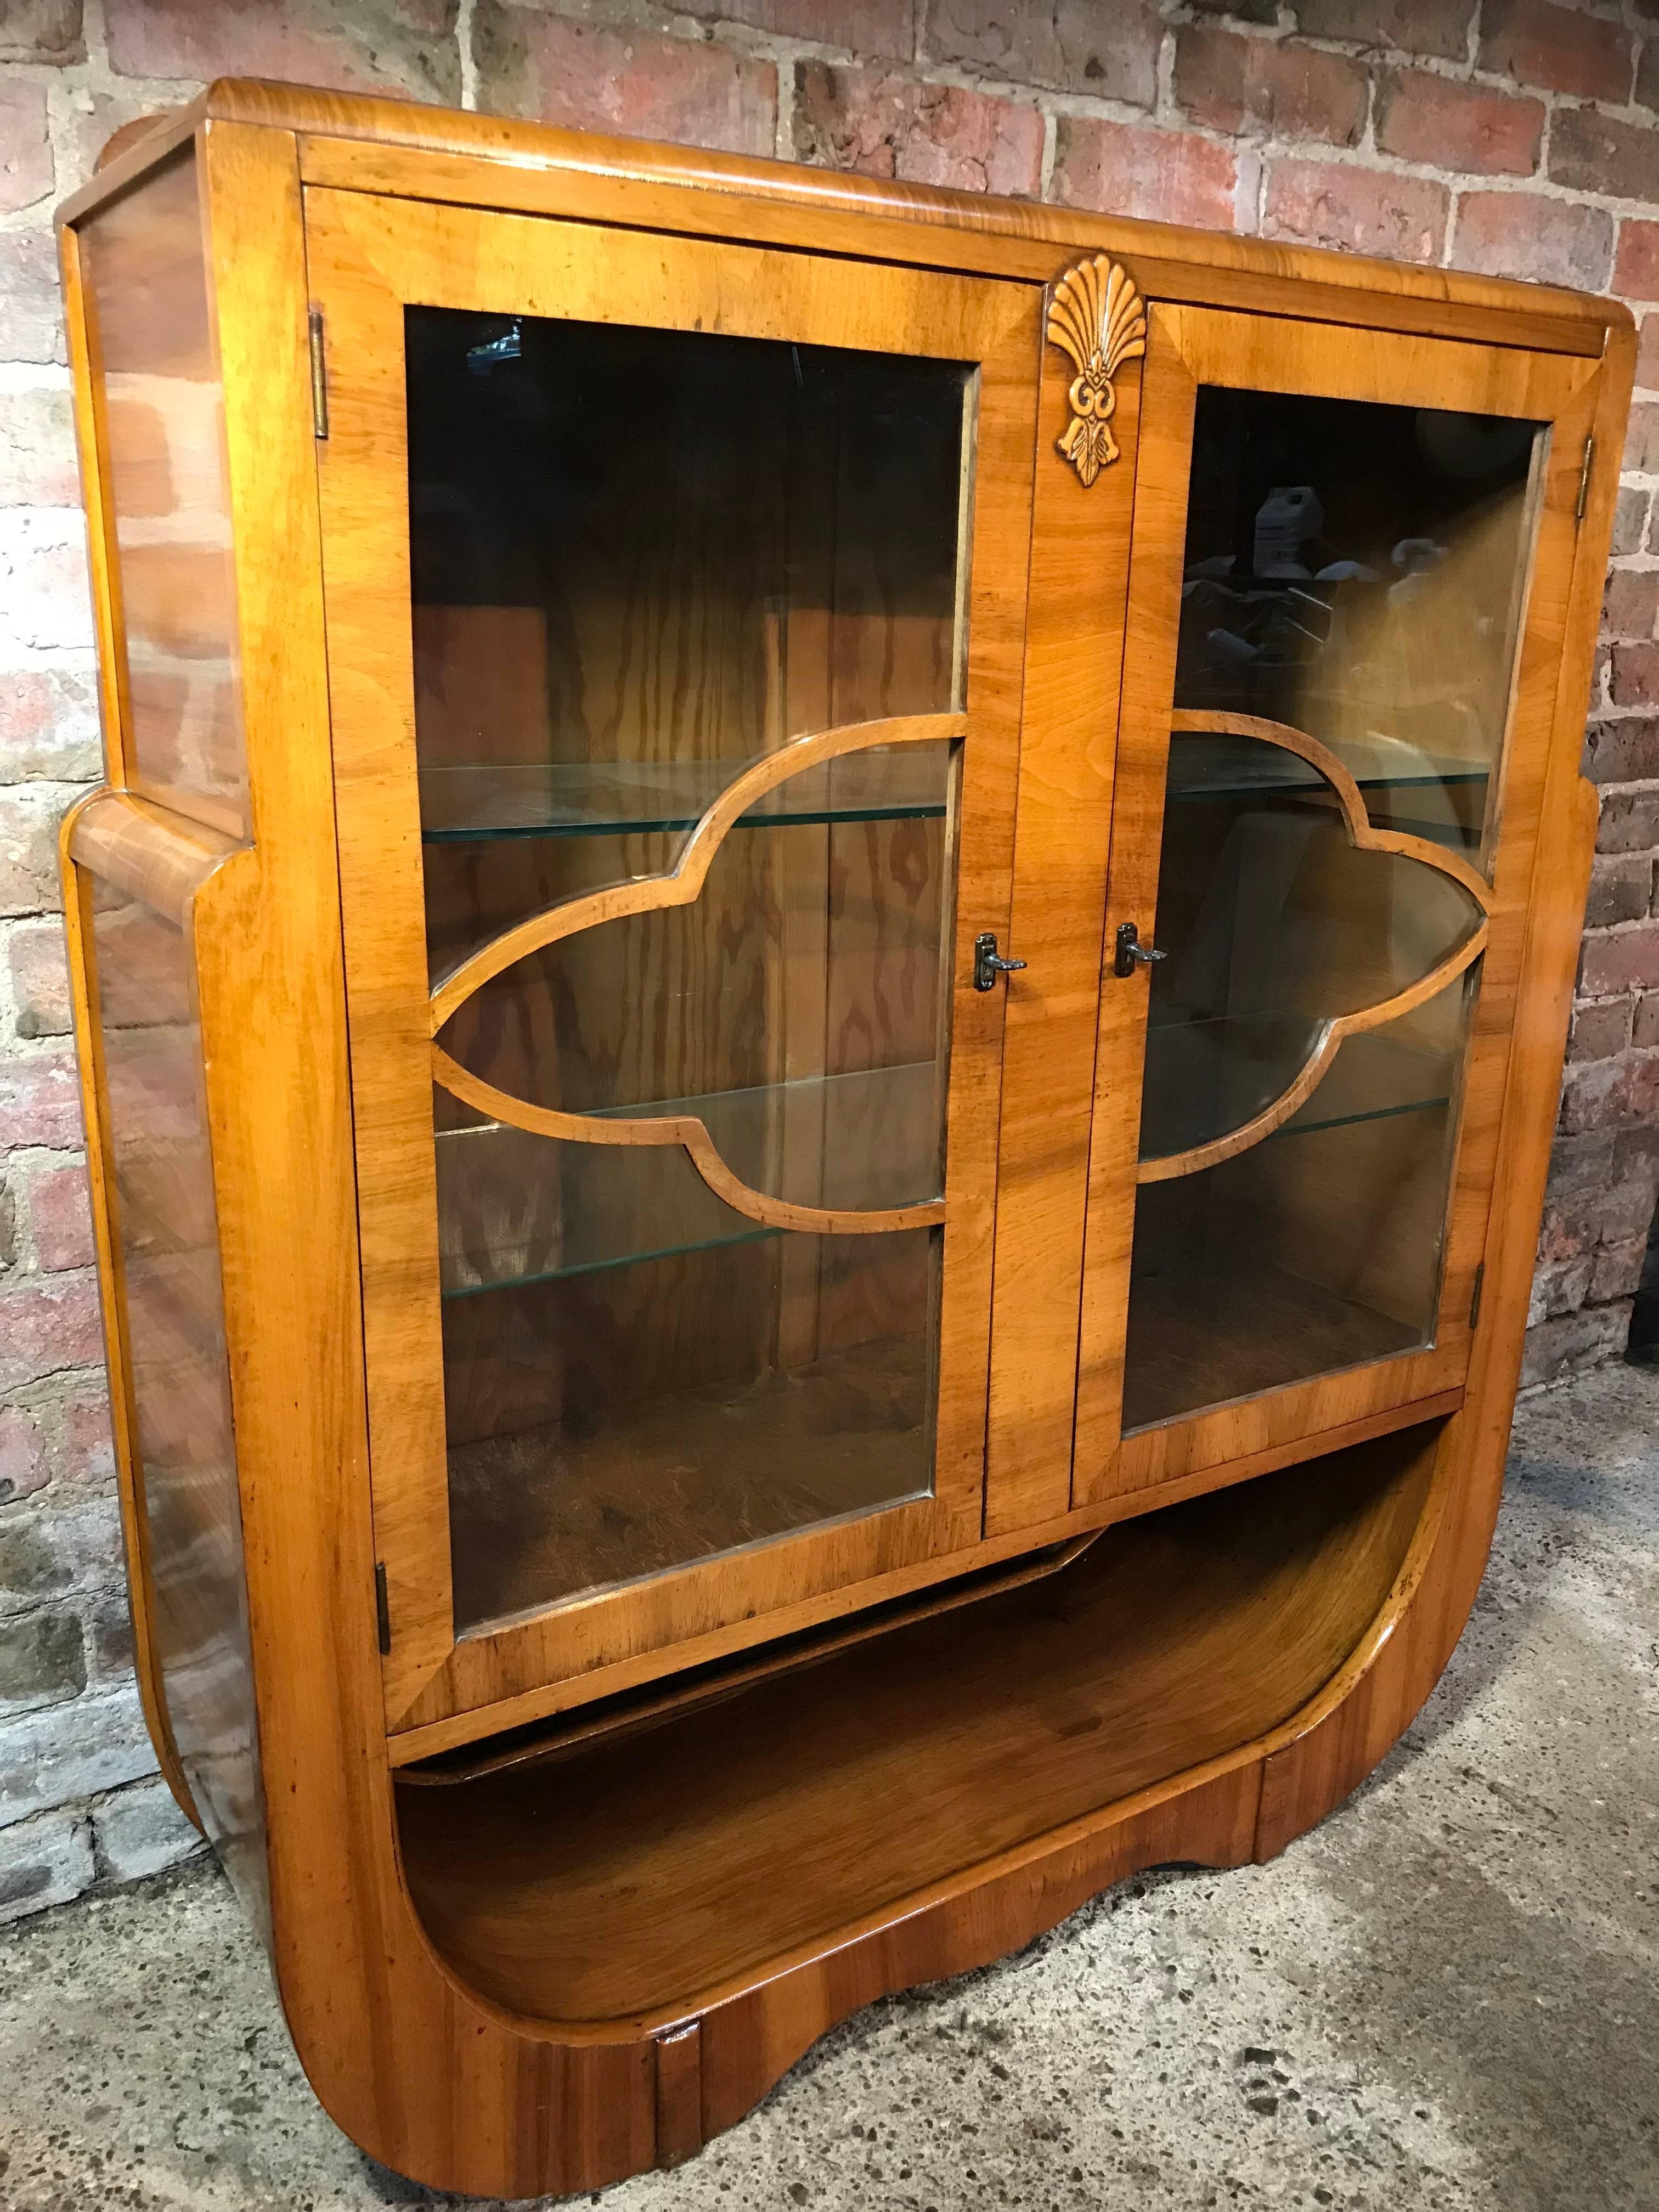 Large English 1930 Art Deco walnut display cabinet in mint condition, it comes with two inturnal glass shelves and a shelf space underneath the main cabinet. It is supplied with two keys.